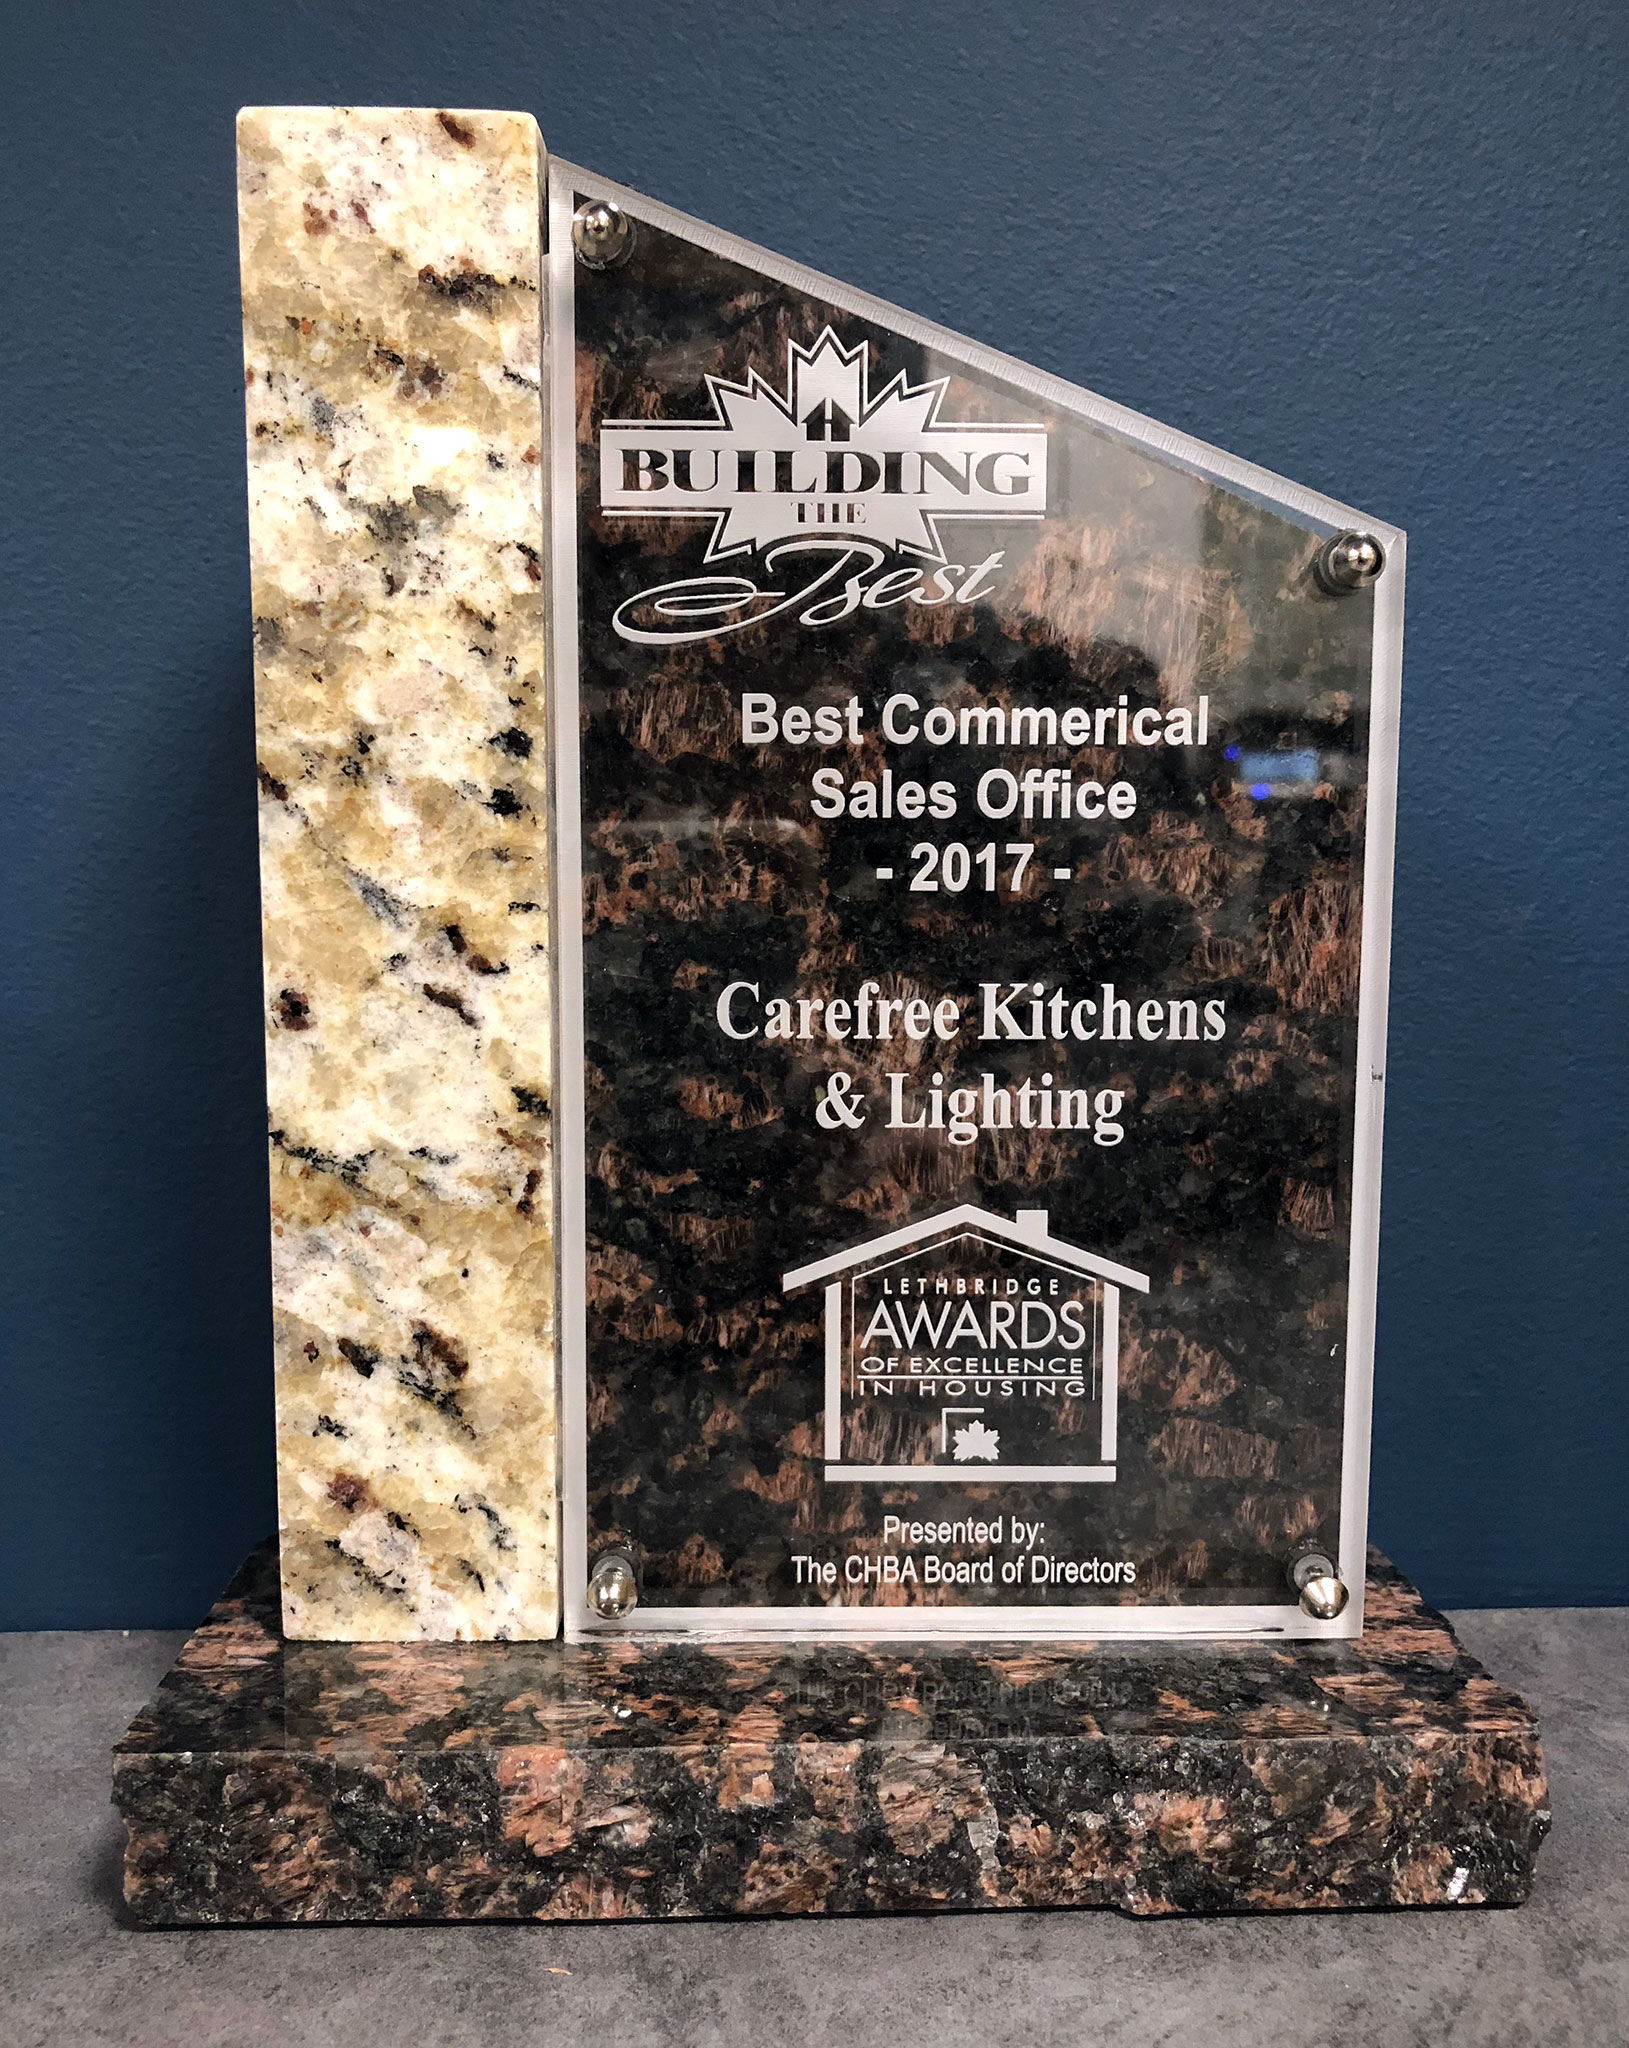 Building the Best Awards – Best Commercial Sales Office